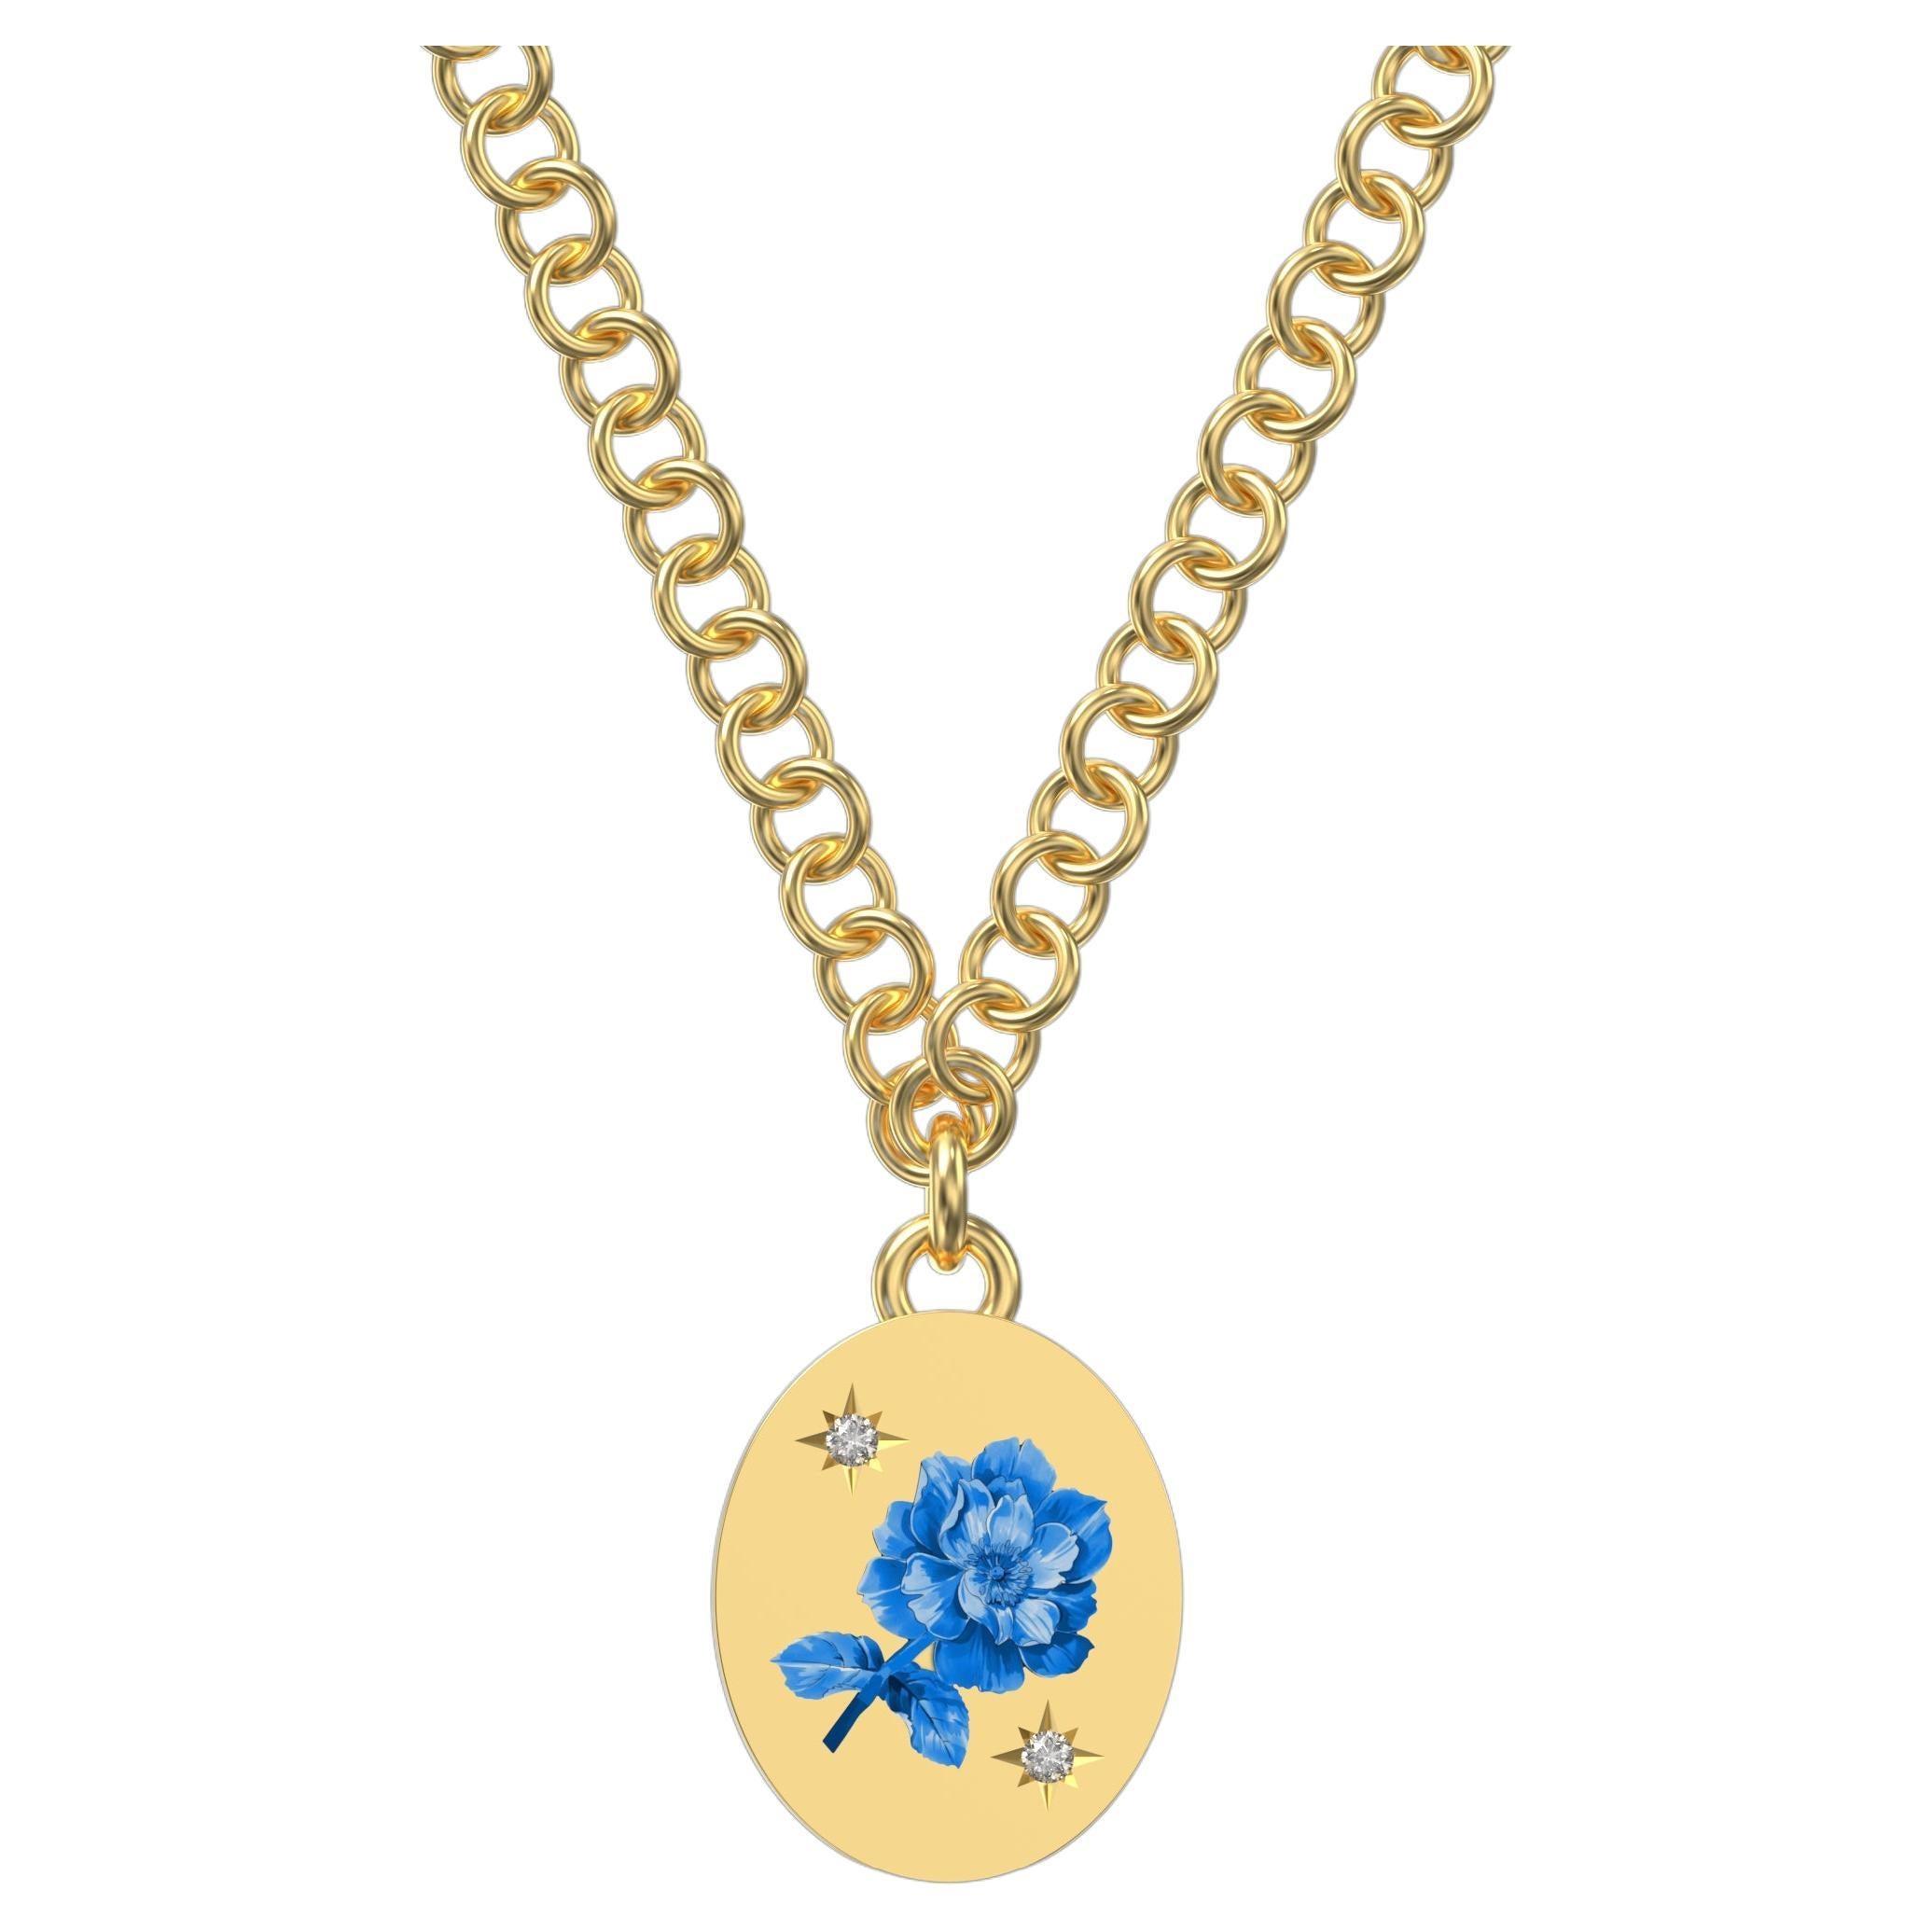 Blue & White Rose with Diamonds Pendant Necklace, 18k yellow gold